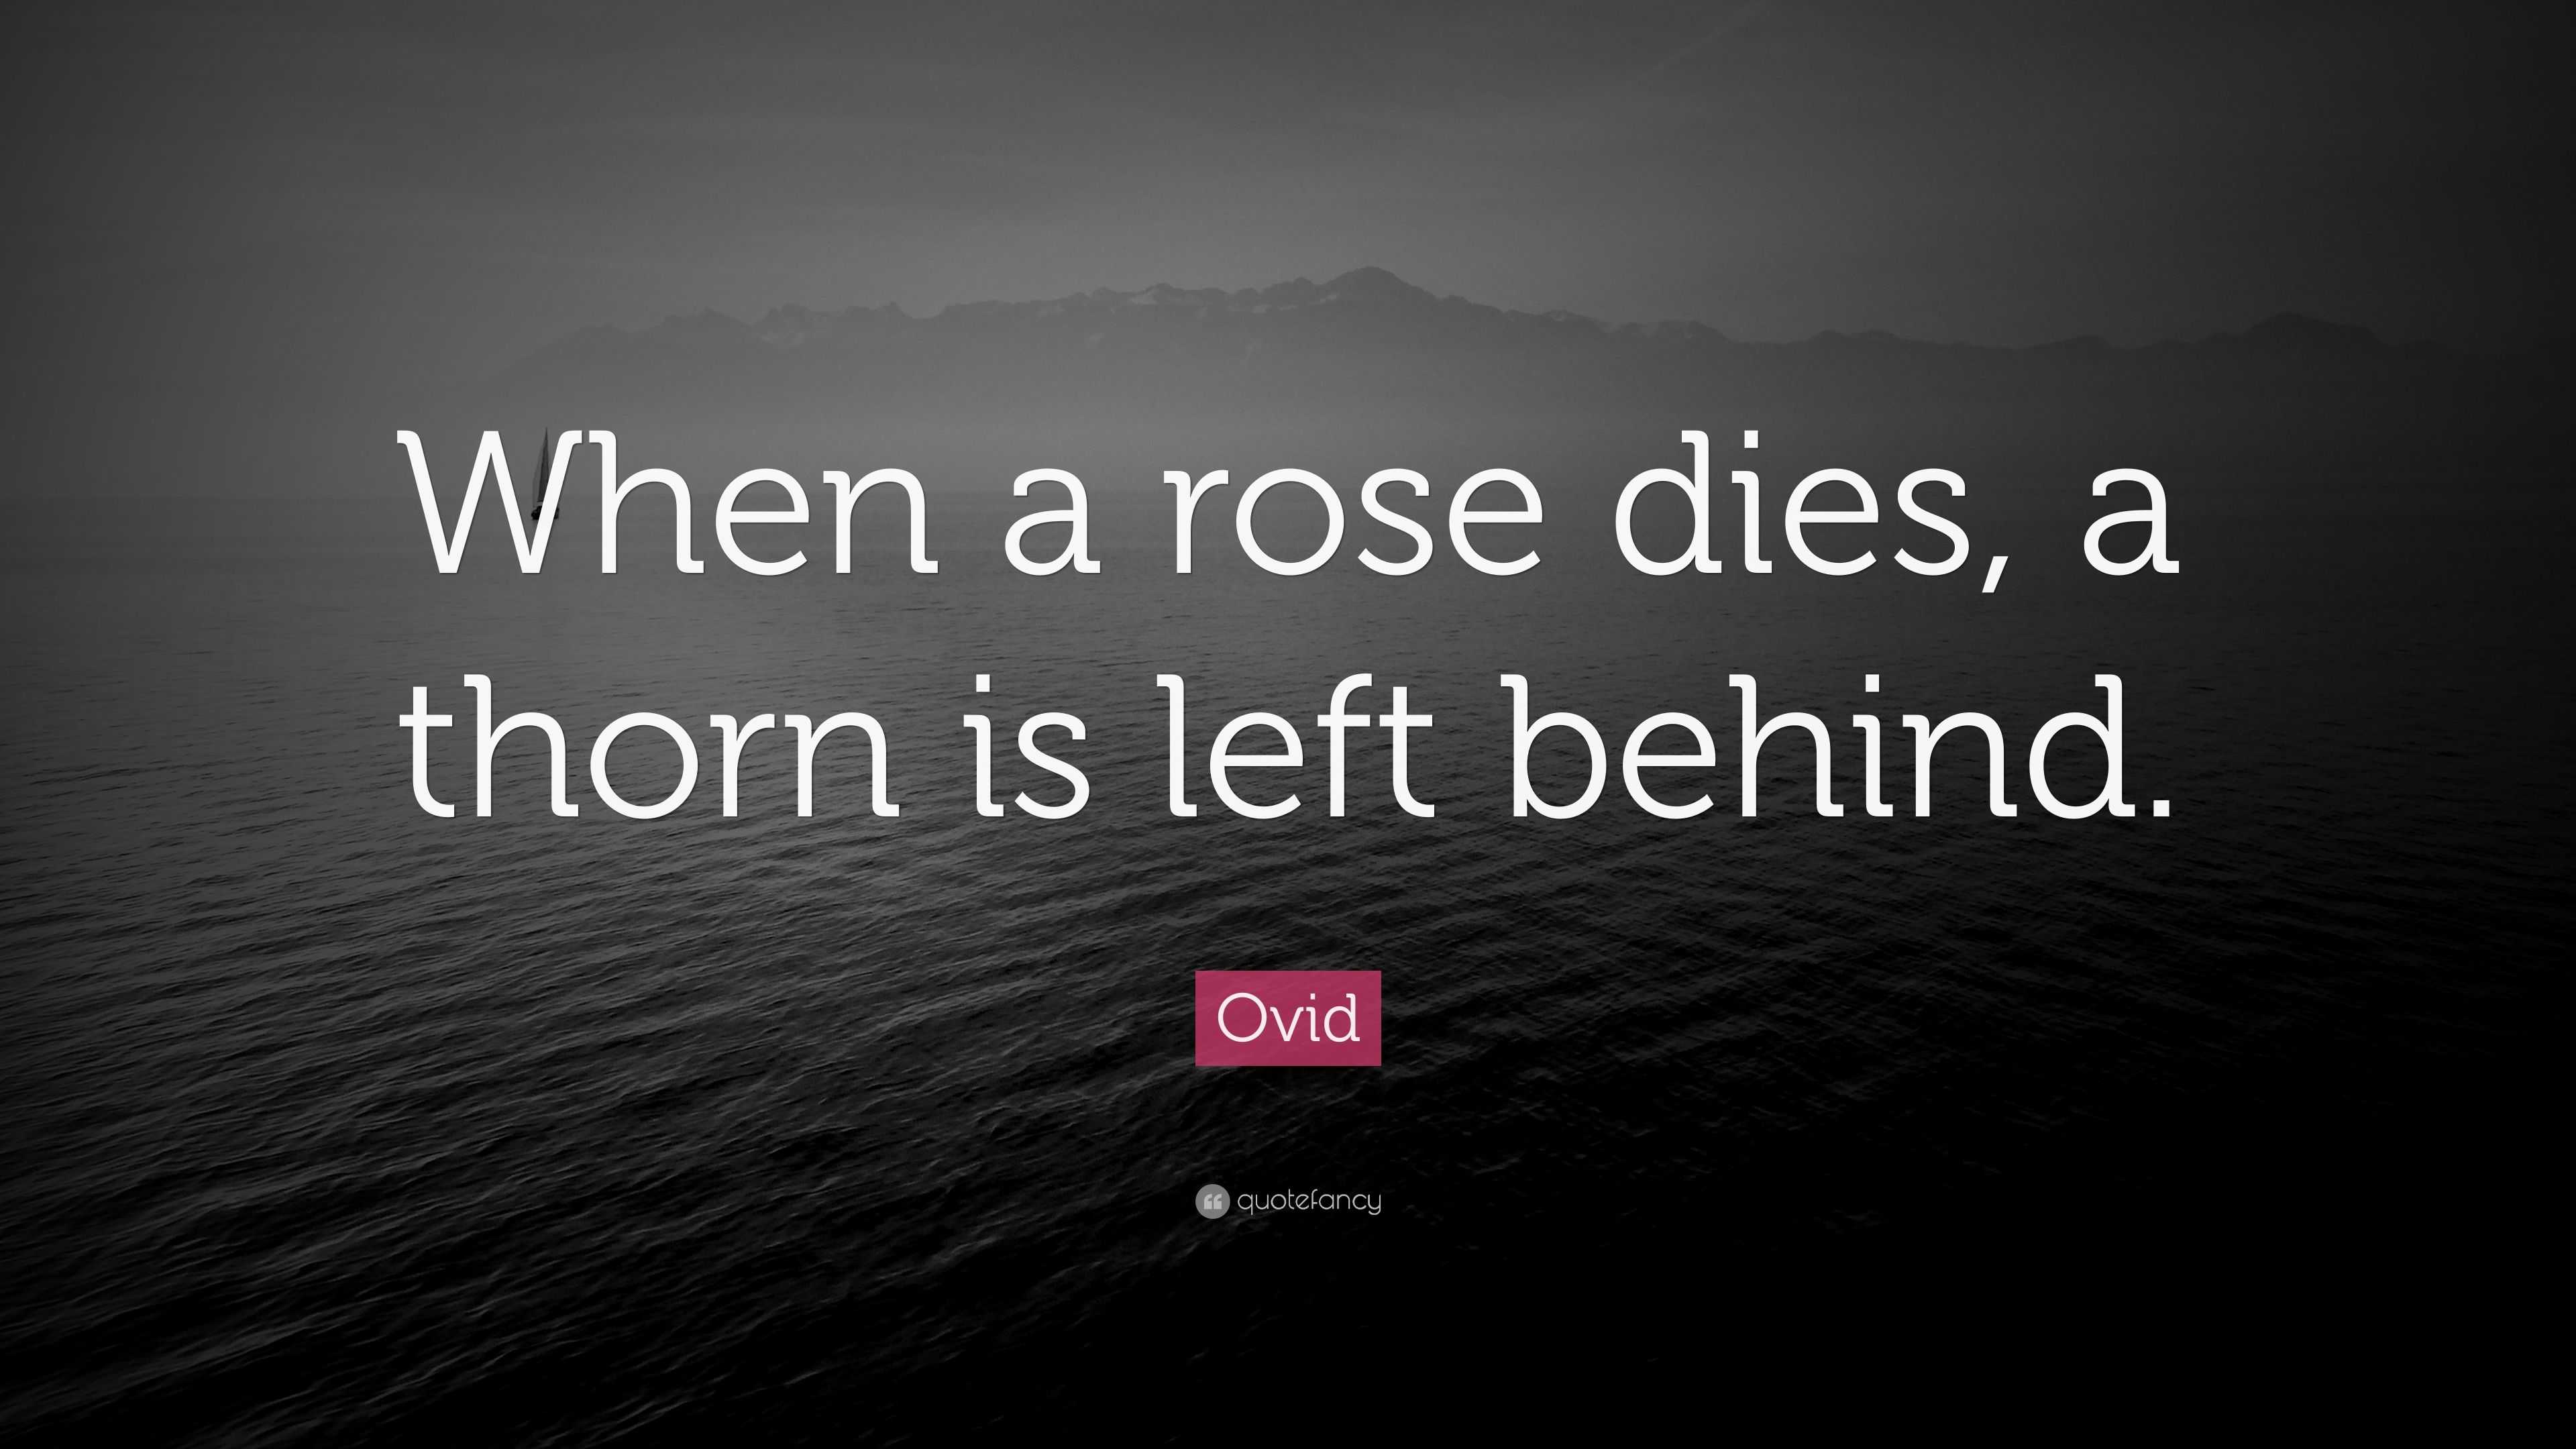 Ovid Quote: "When a rose dies, a thorn is left behind." (10 wallpapers) - Quotefancy